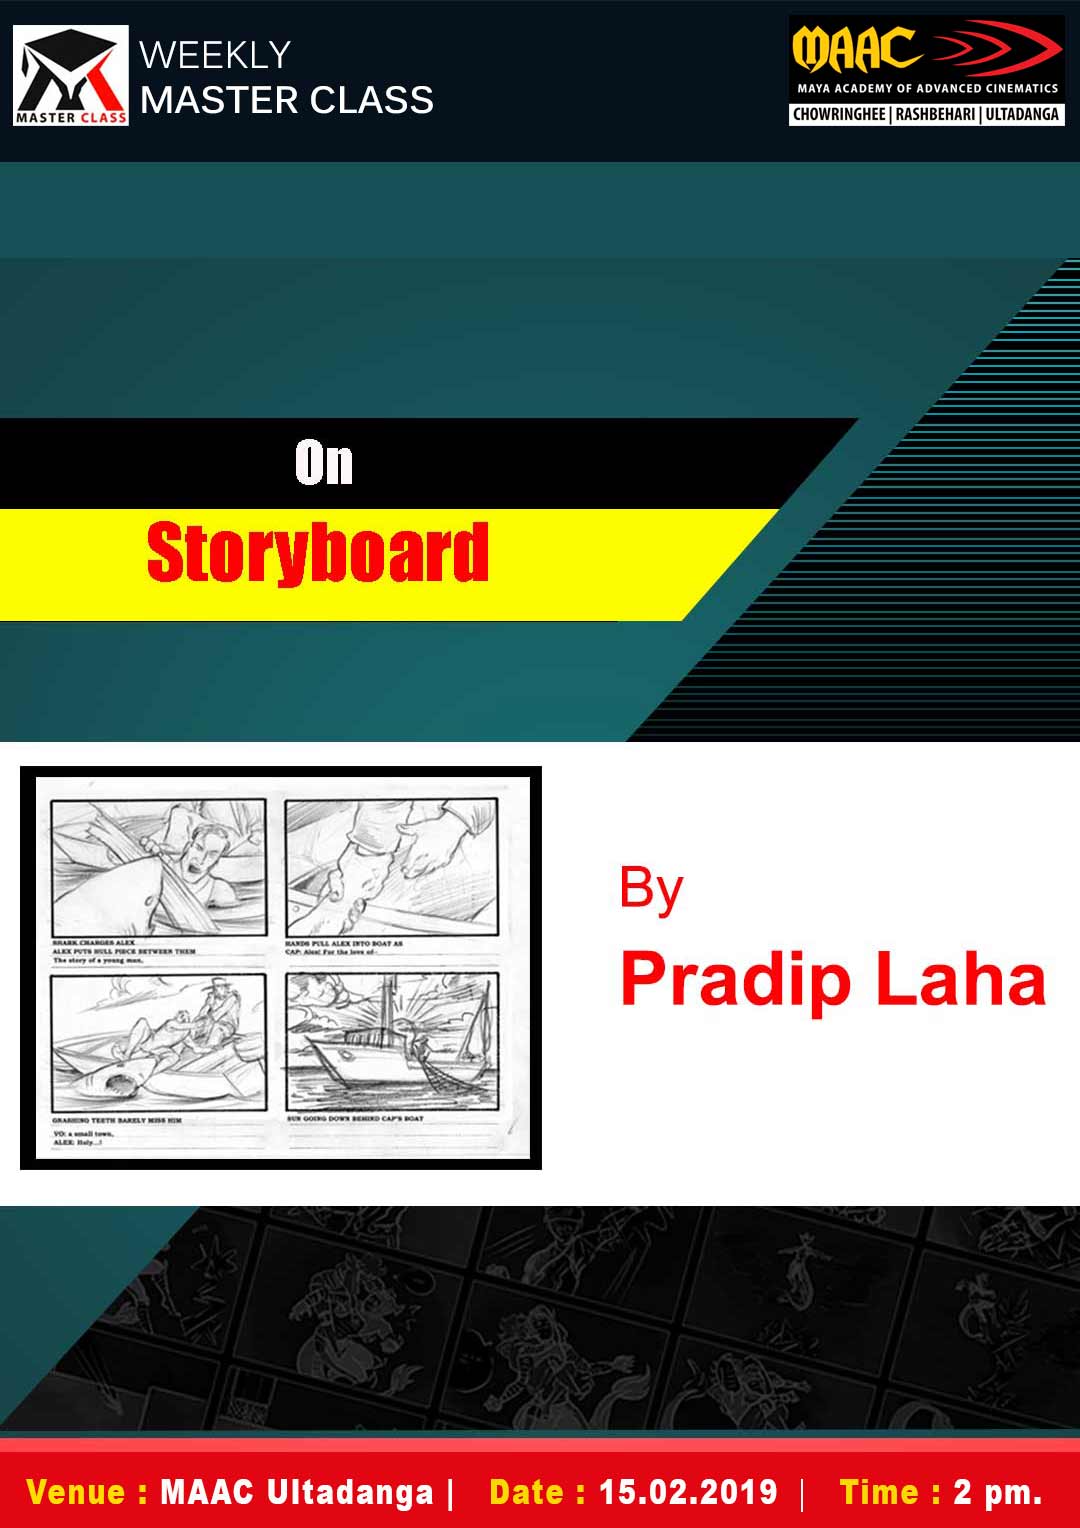 Weekly Master Class on Story Boarding